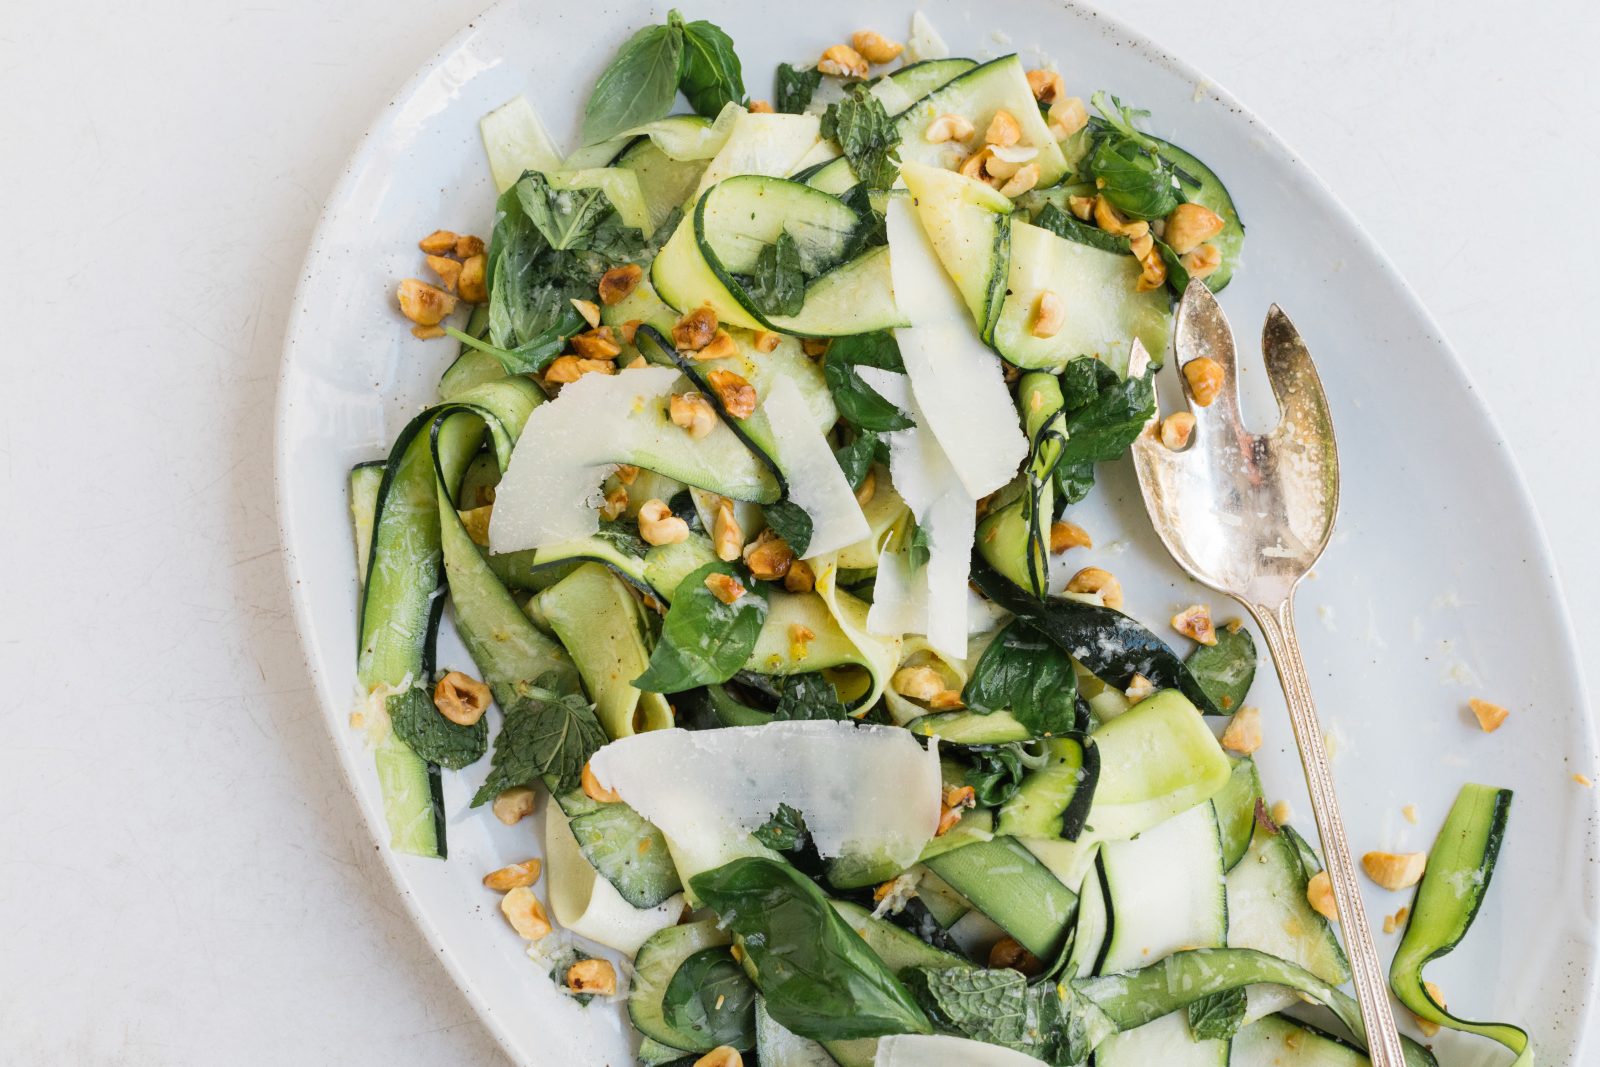 Raw Zucchini: What's New is Old Again